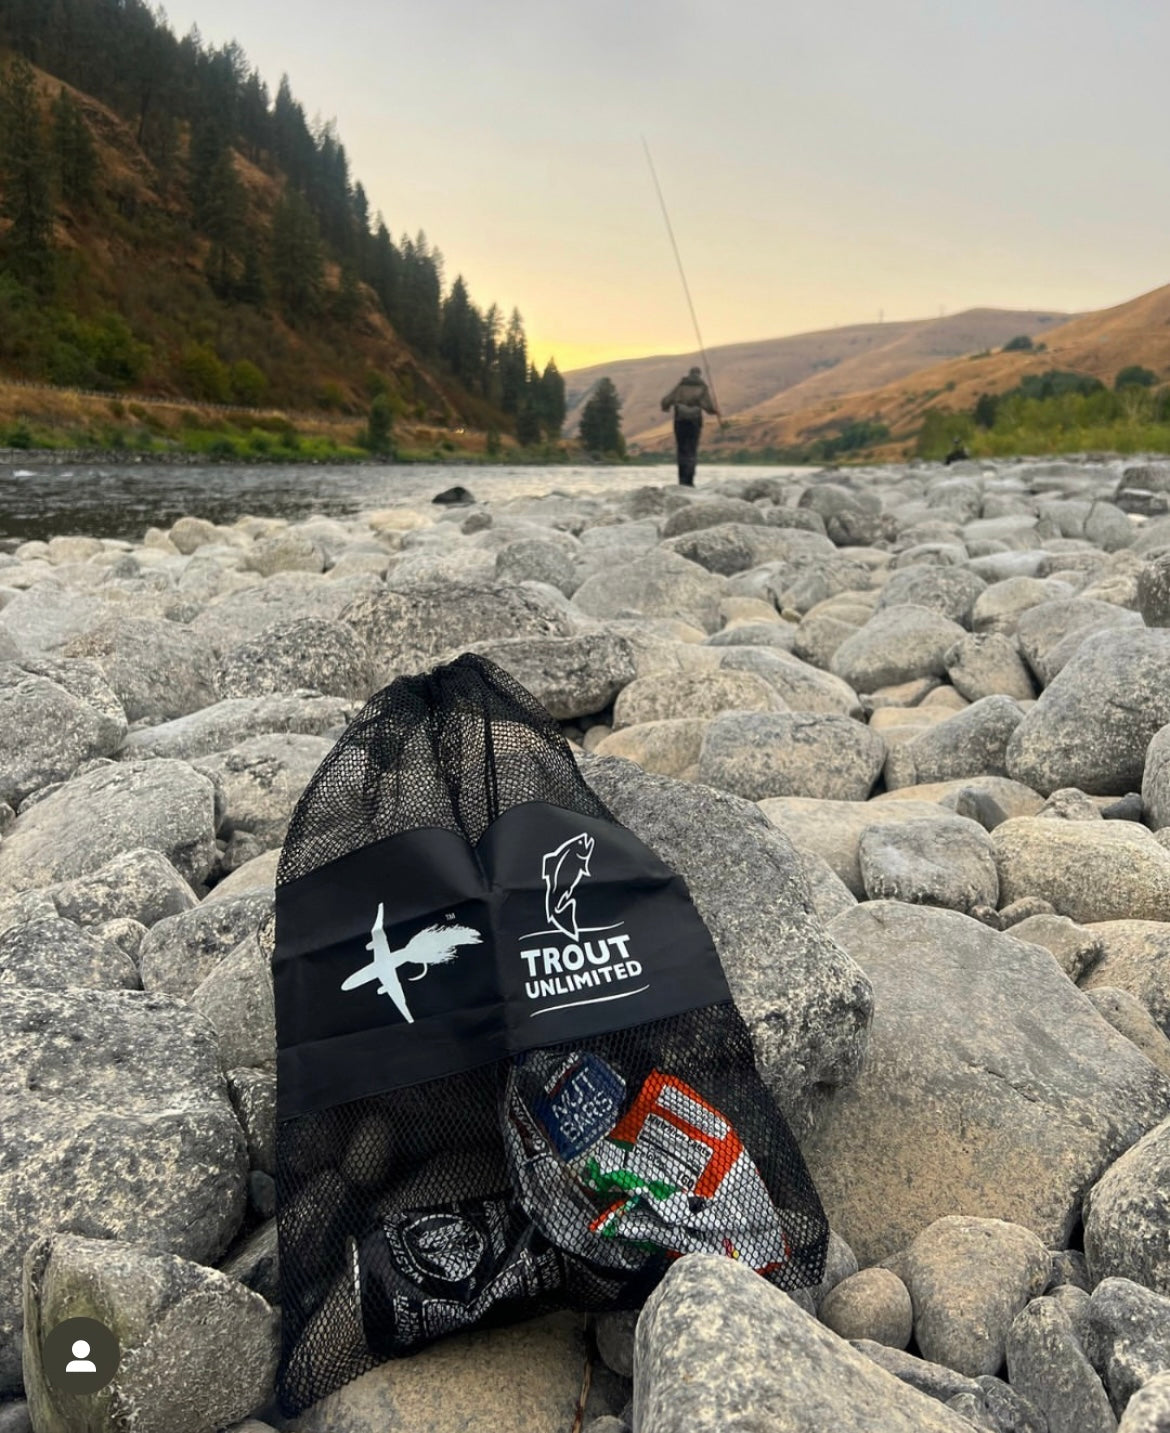 TROUT HERO STREAM CLEAN UP BAGS | YOUR SIMPLE REUSABLE BAG TO PACK OUT TRASH ON THE RIVER | TROUT UNLIMITED PARTNERSHIP | GET ONE FREE WITH CODE IN LISTING